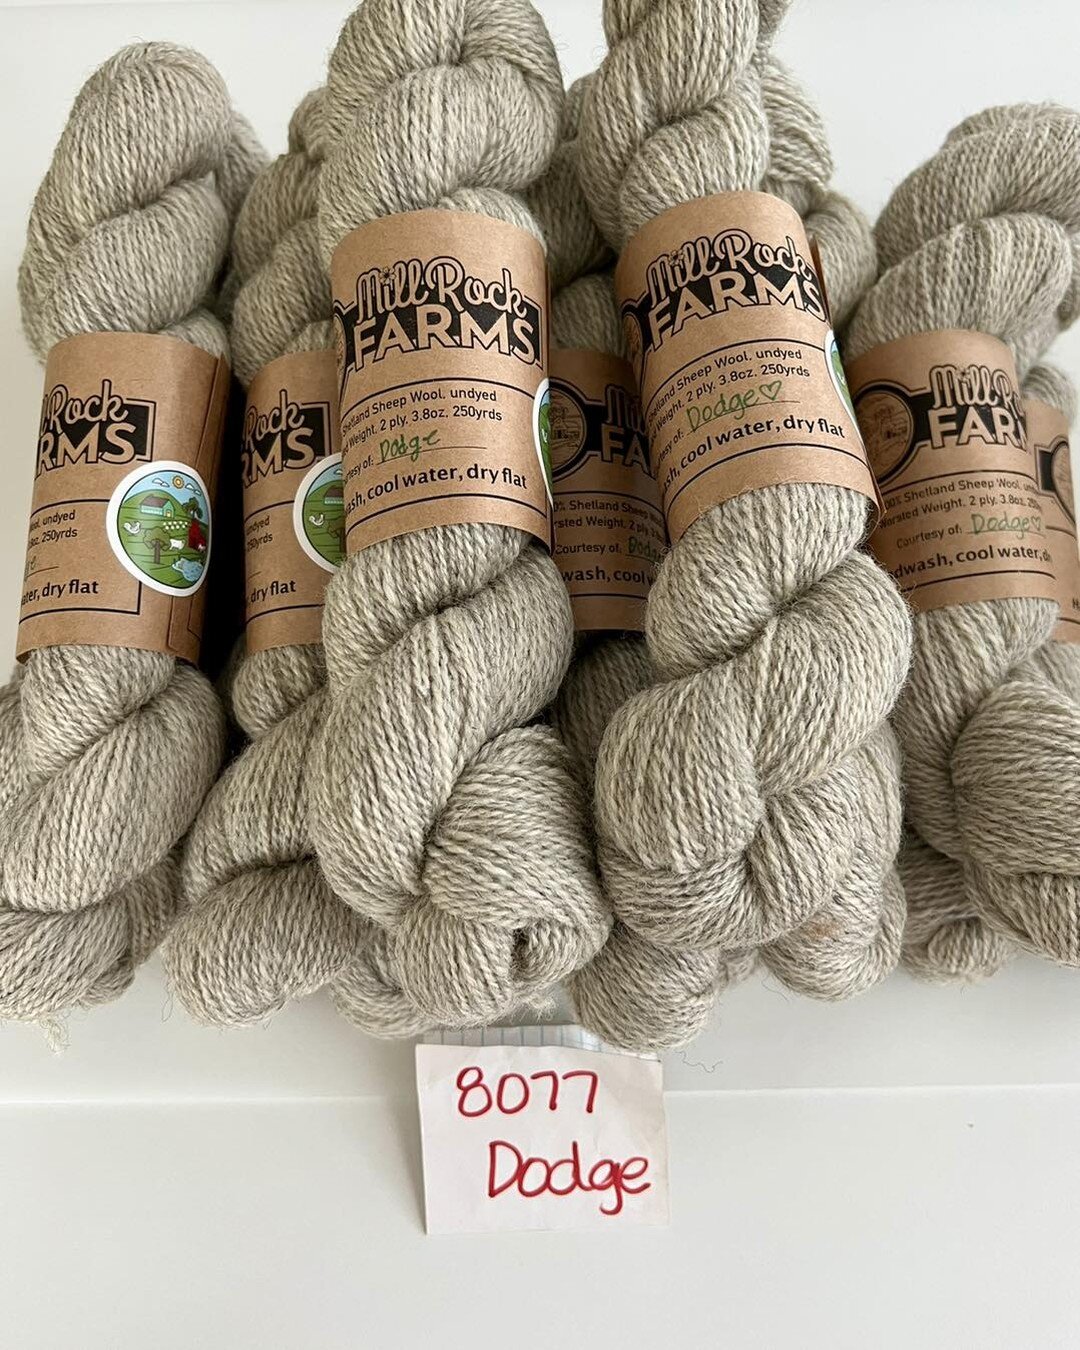 100 degree temps have nothing on boxes full of luscious farm yarn to us diehard fiber enthusiasts 🧶 🌟 🤩 🐑!! 

Just back from the mill, skeins of gorgeous worsted weight yarn from this year&rsquo;s spring shearing and this is only from three sheep